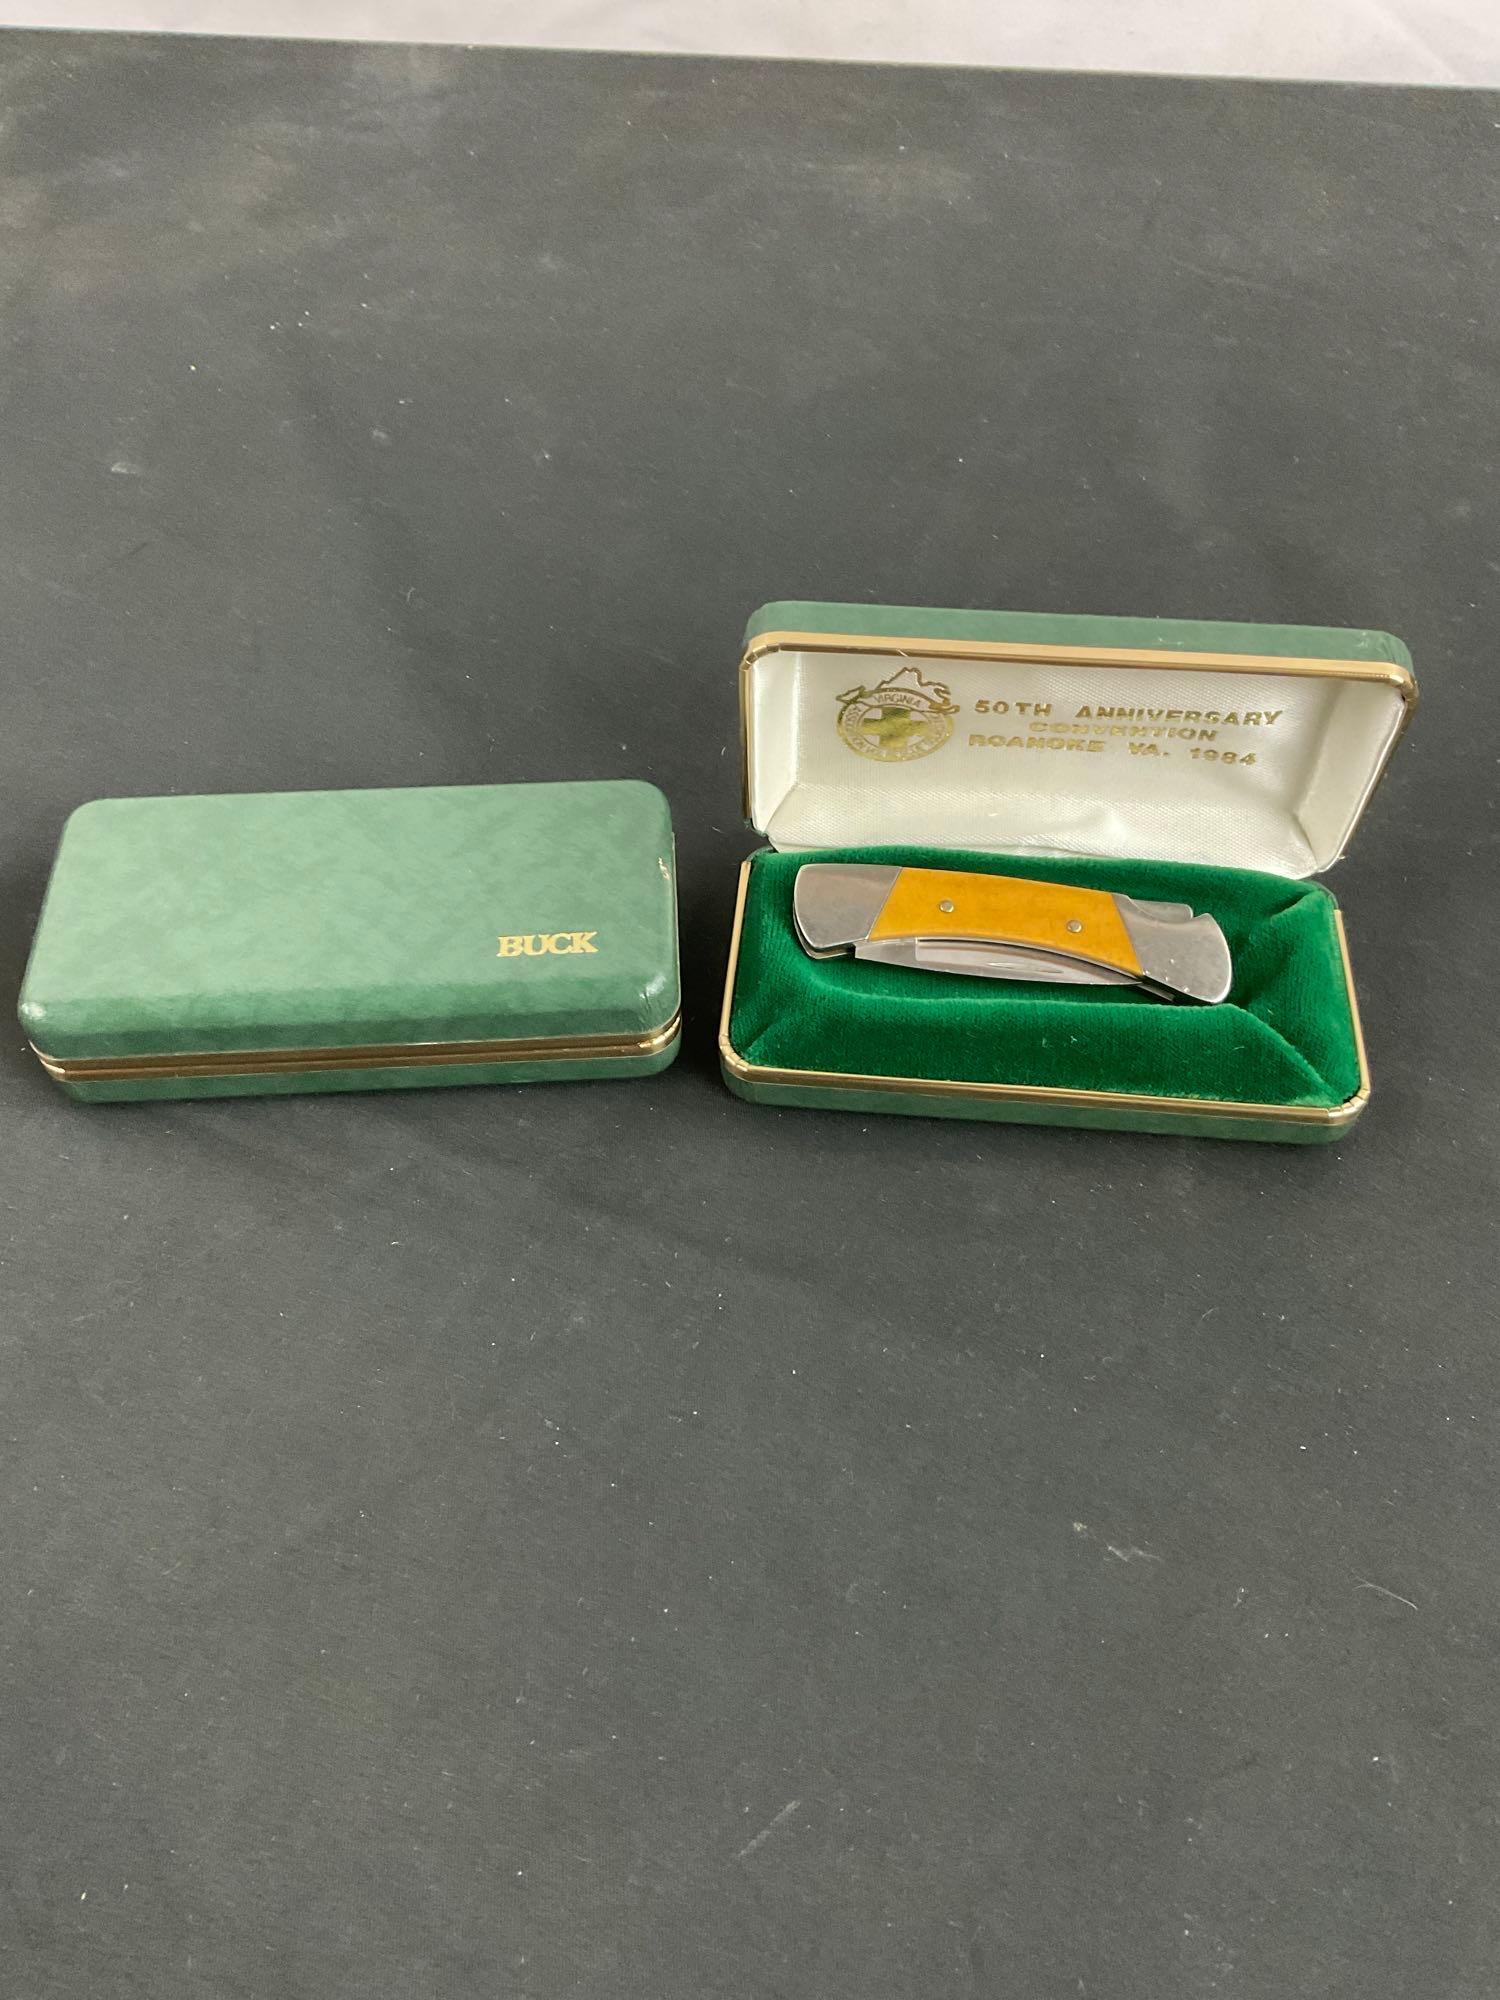 Buck Folding Pocket Knives - 50th Anniversary Convention Knives - Numbered 506 & 505T